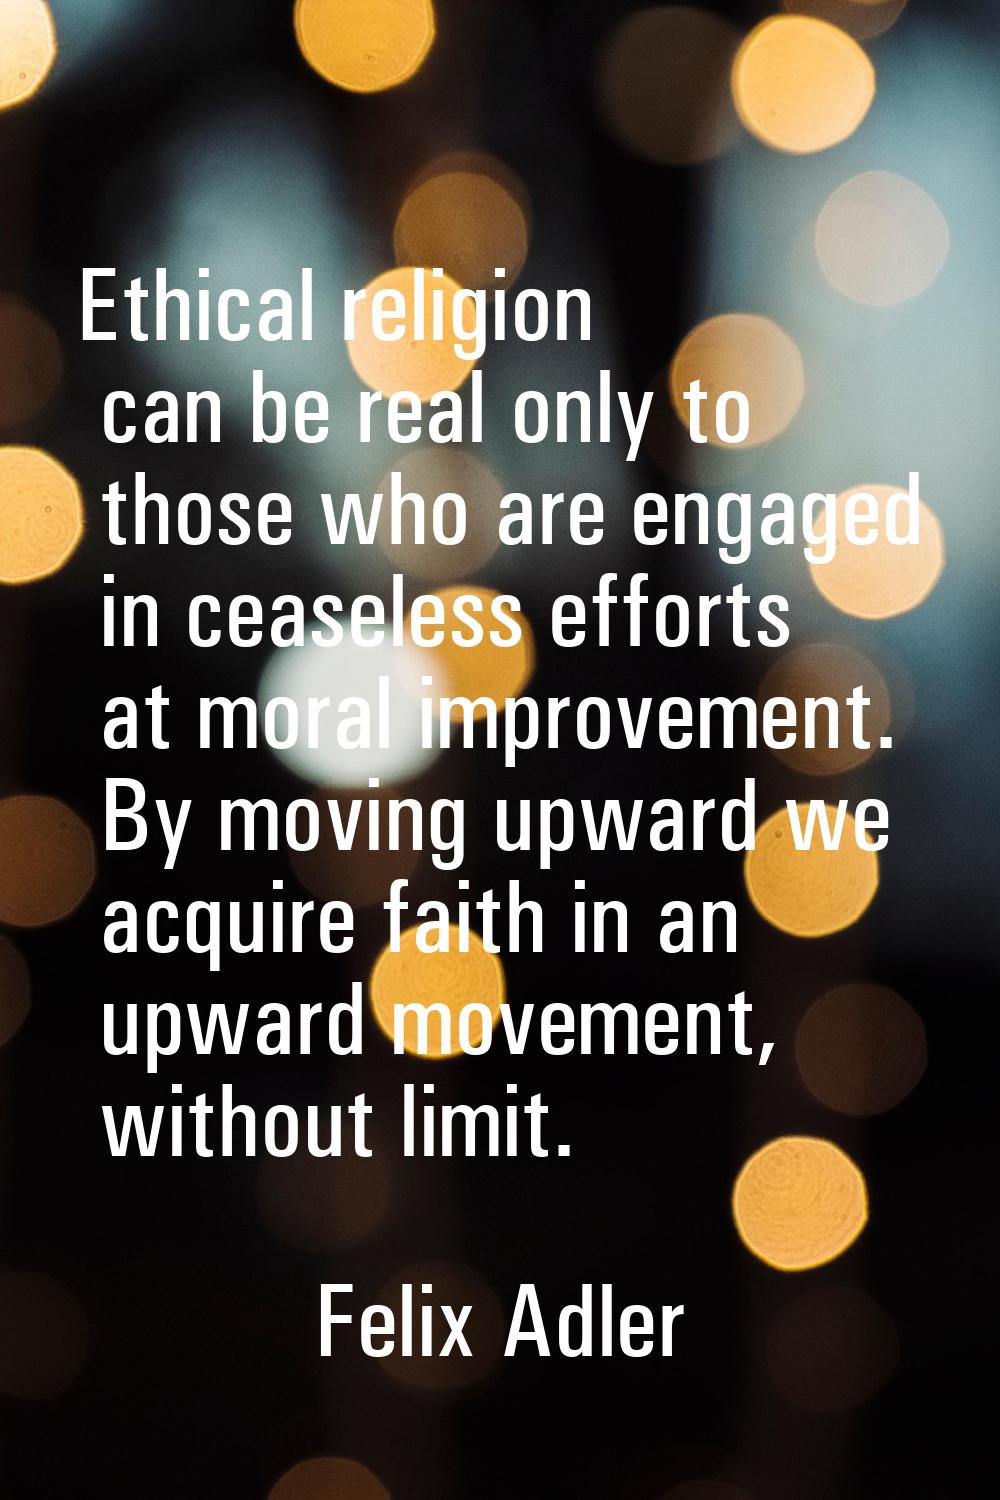 Ethical religion can be real only to those who are engaged in ceaseless efforts at moral improvemen